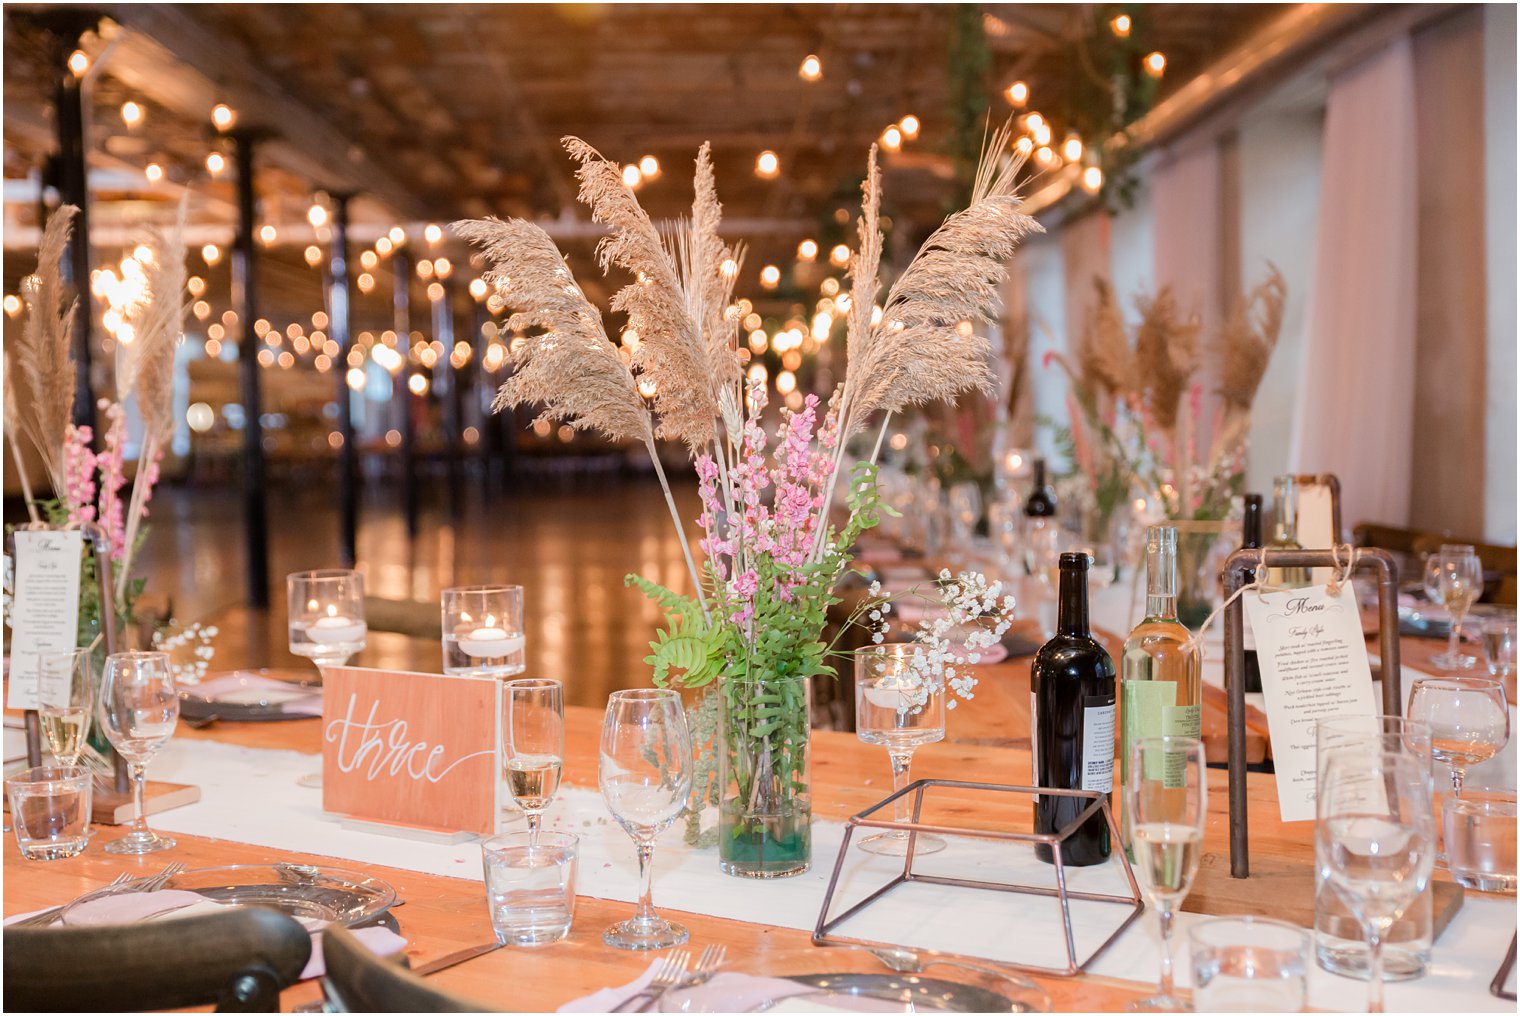 Reception decor for industrial chic wedding at Art Factory Studios in Paterson NJ